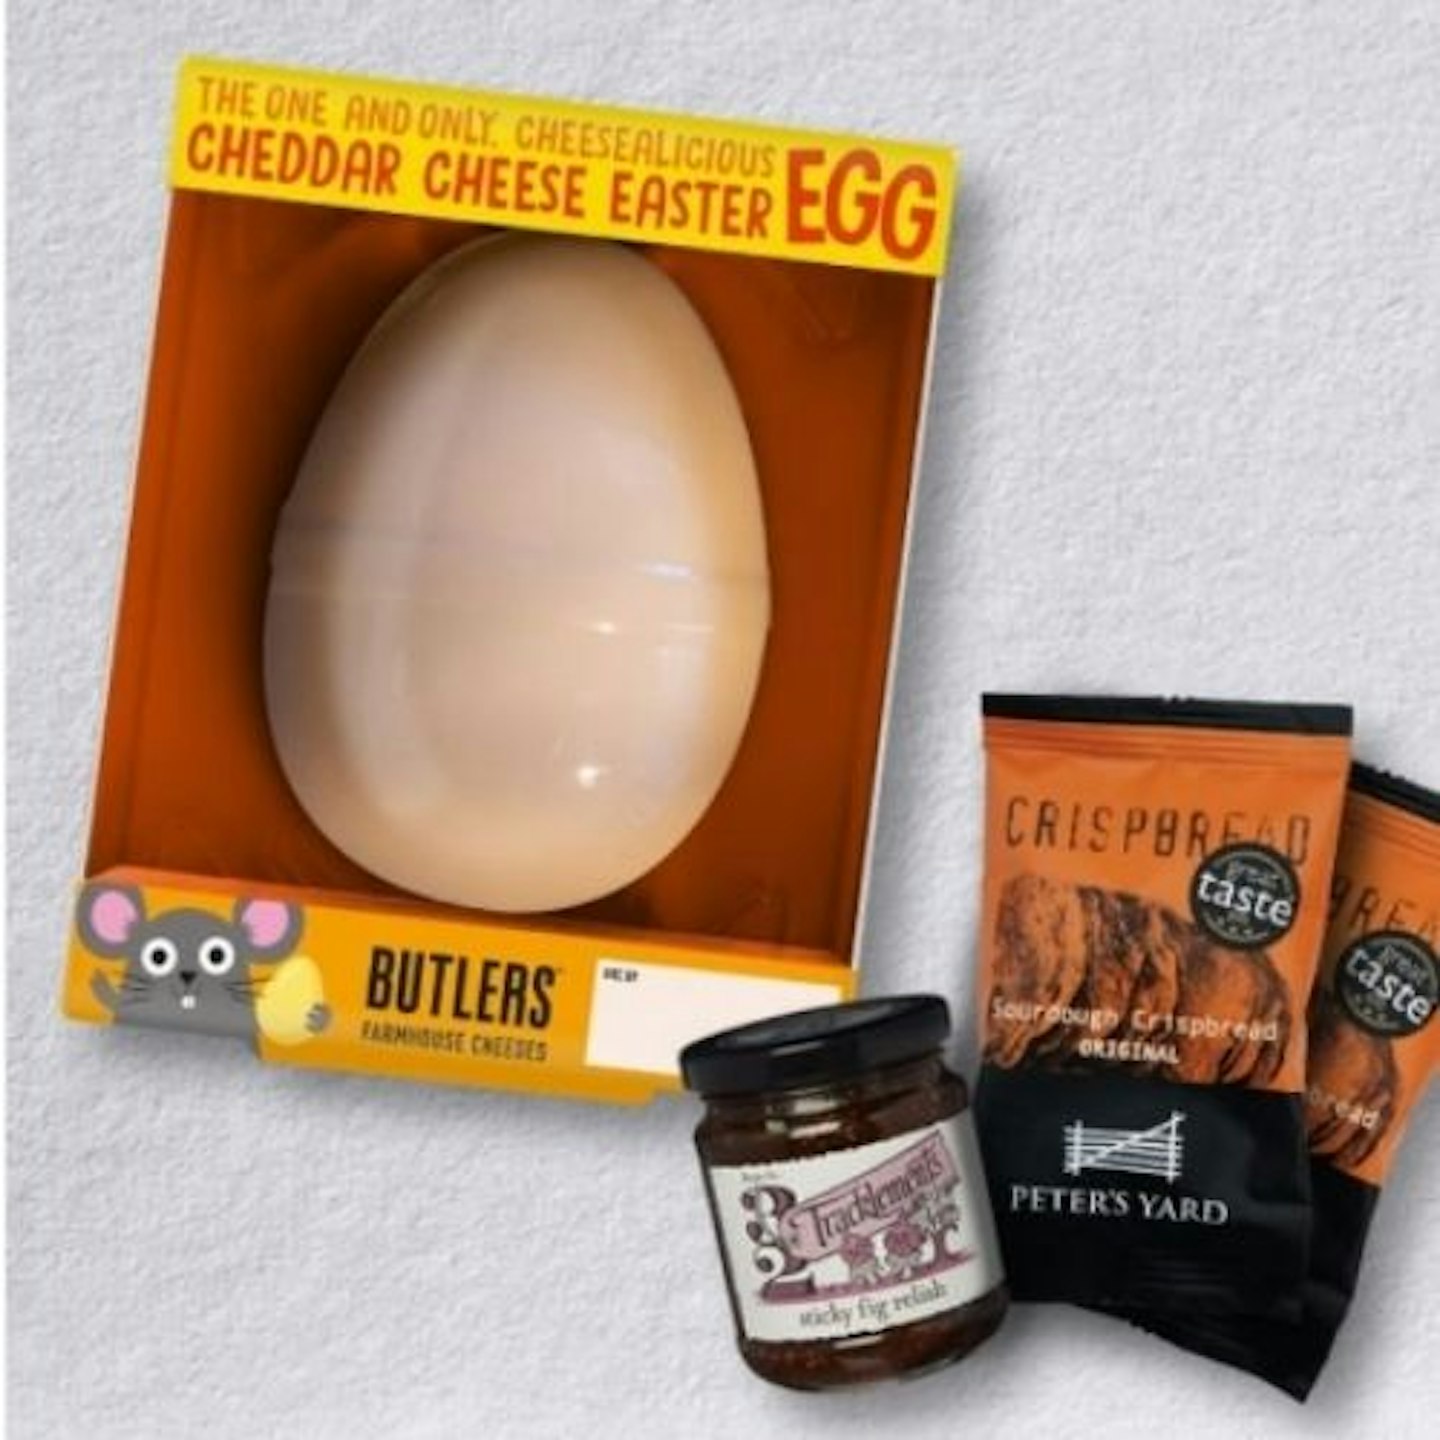 Butlers Farmhouse Cheeses Cheddar Cheese Egg Gift Set